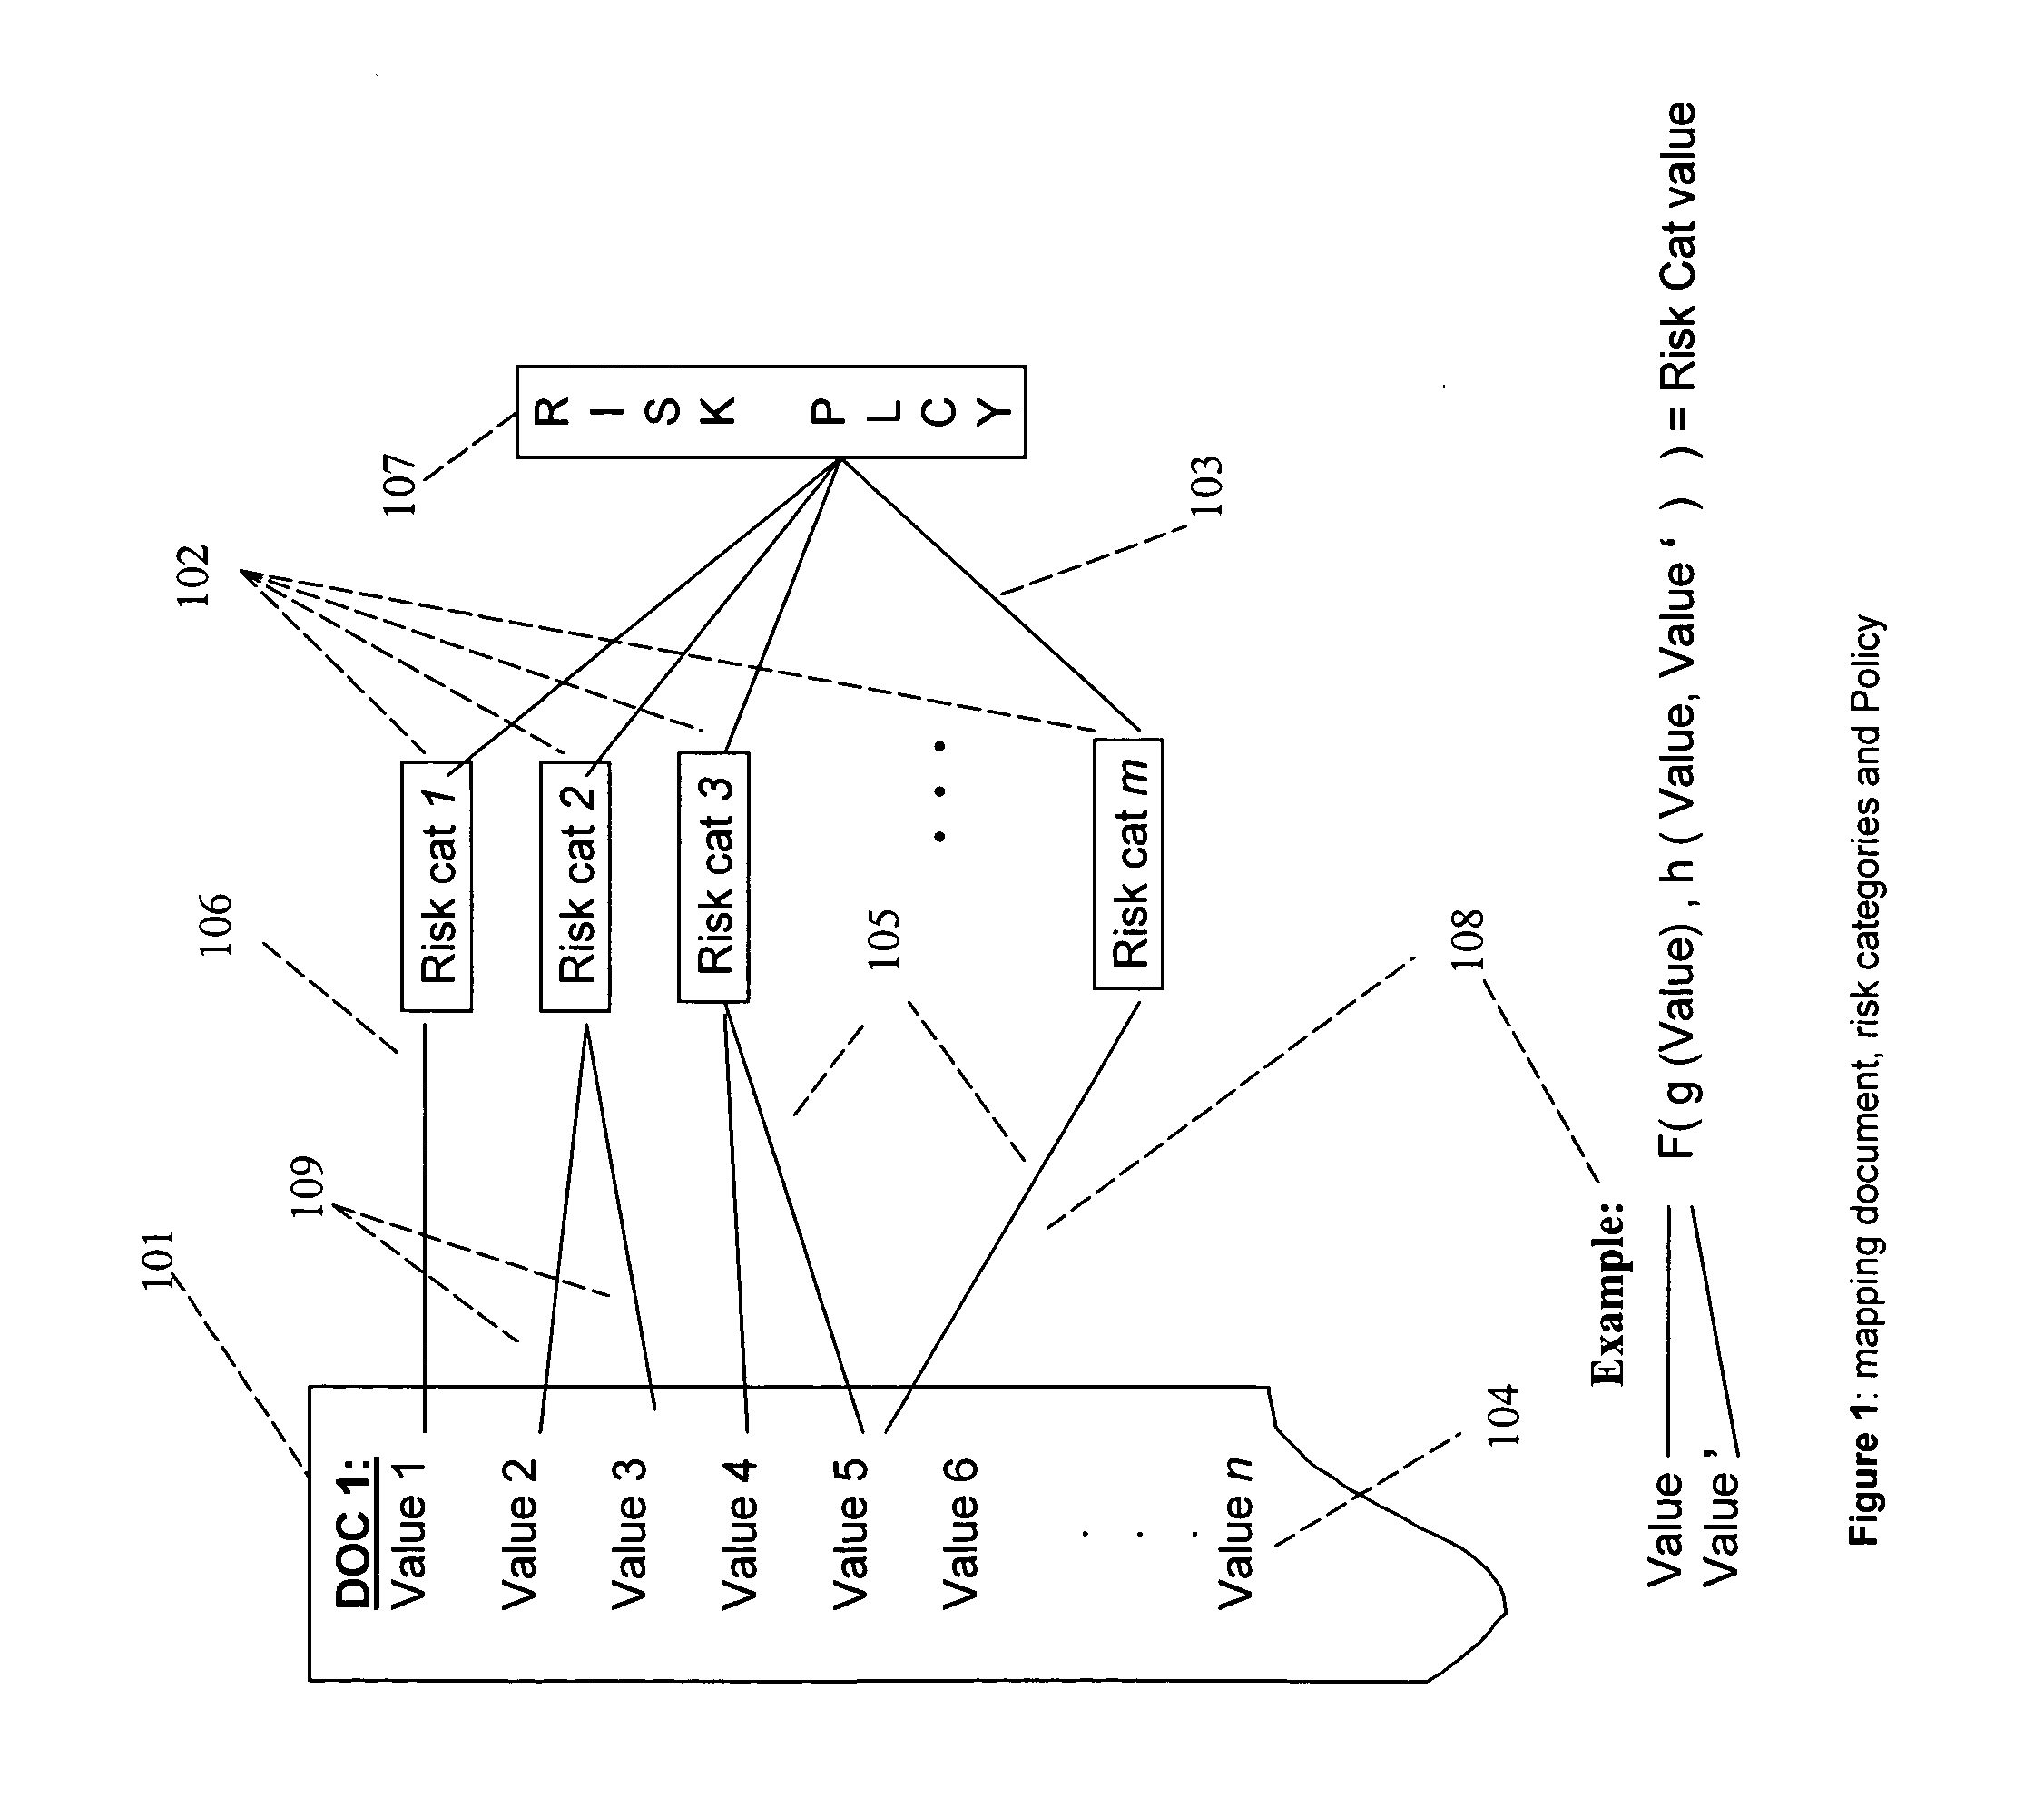 System and method for risk detection reporting and infrastructure